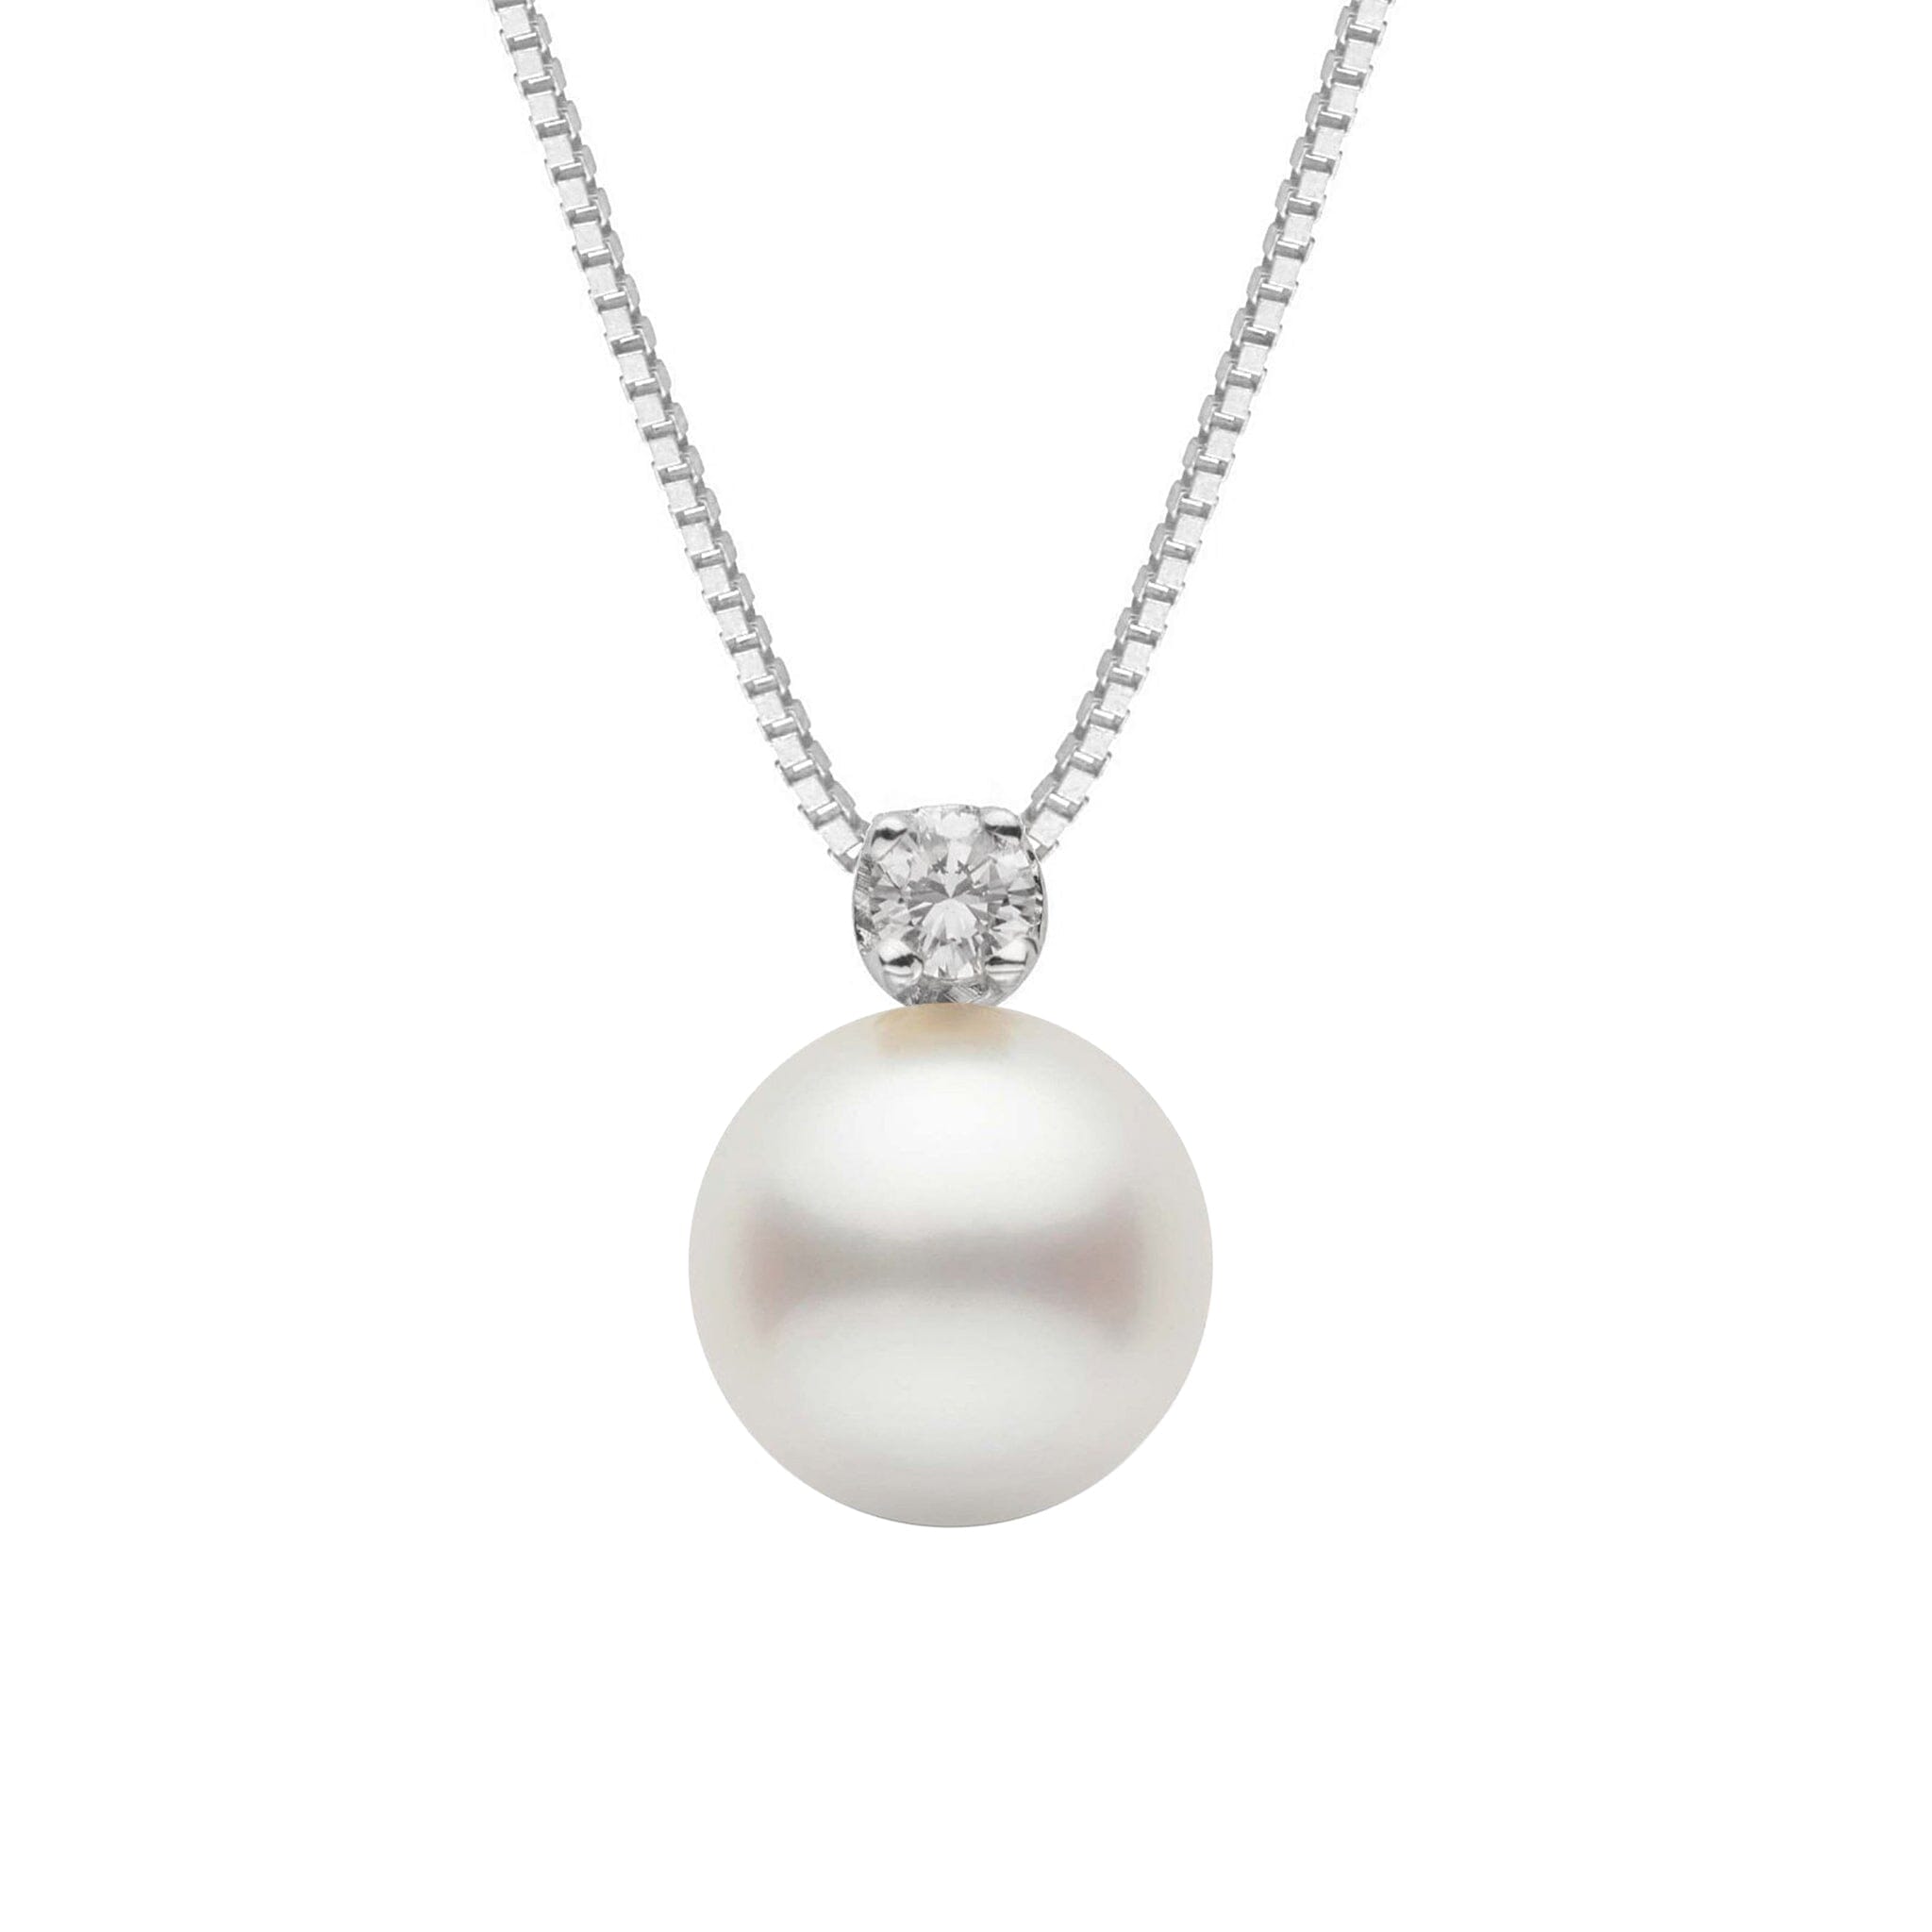 North Star Collection 10.0-11.0 mm White South Sea Pearl and Diamond Pendant